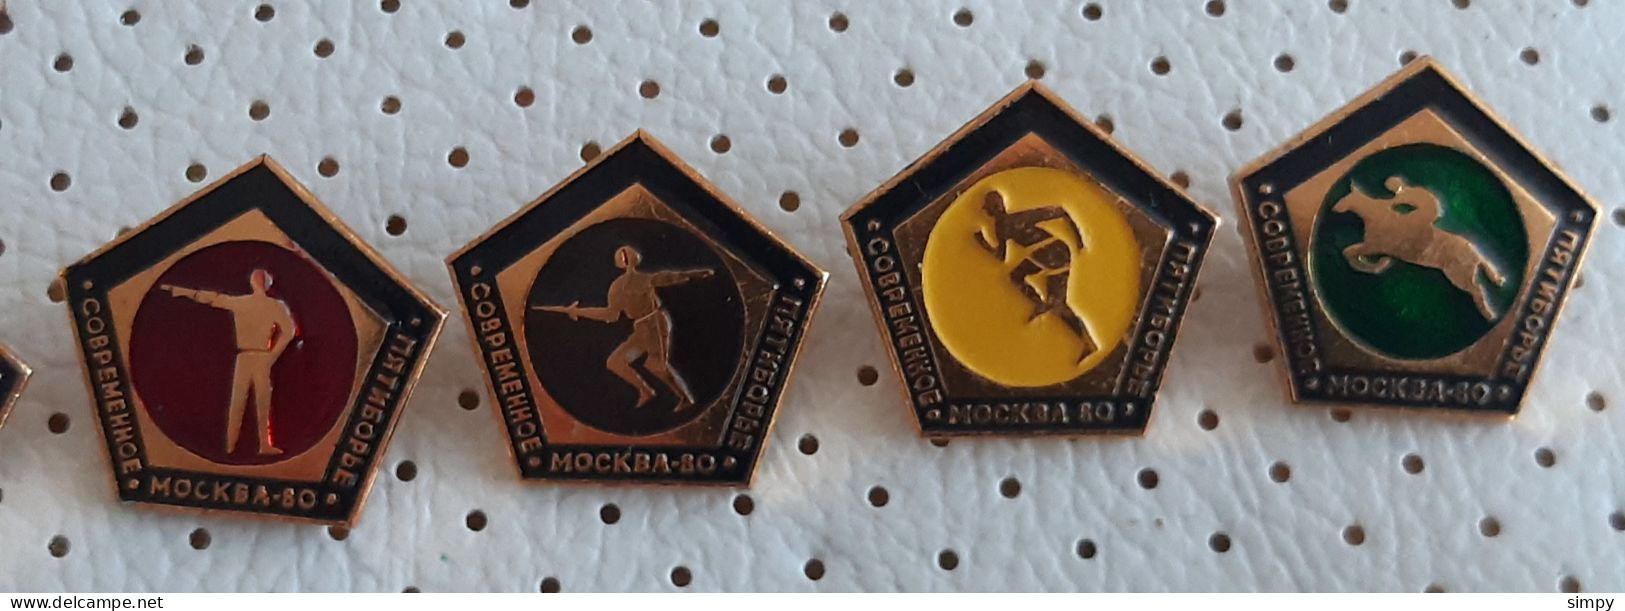 Fencing Swiming Shooting Athletics Equitation Olympic Games Moscow 1980 Complete Set Pins - Weightlifting